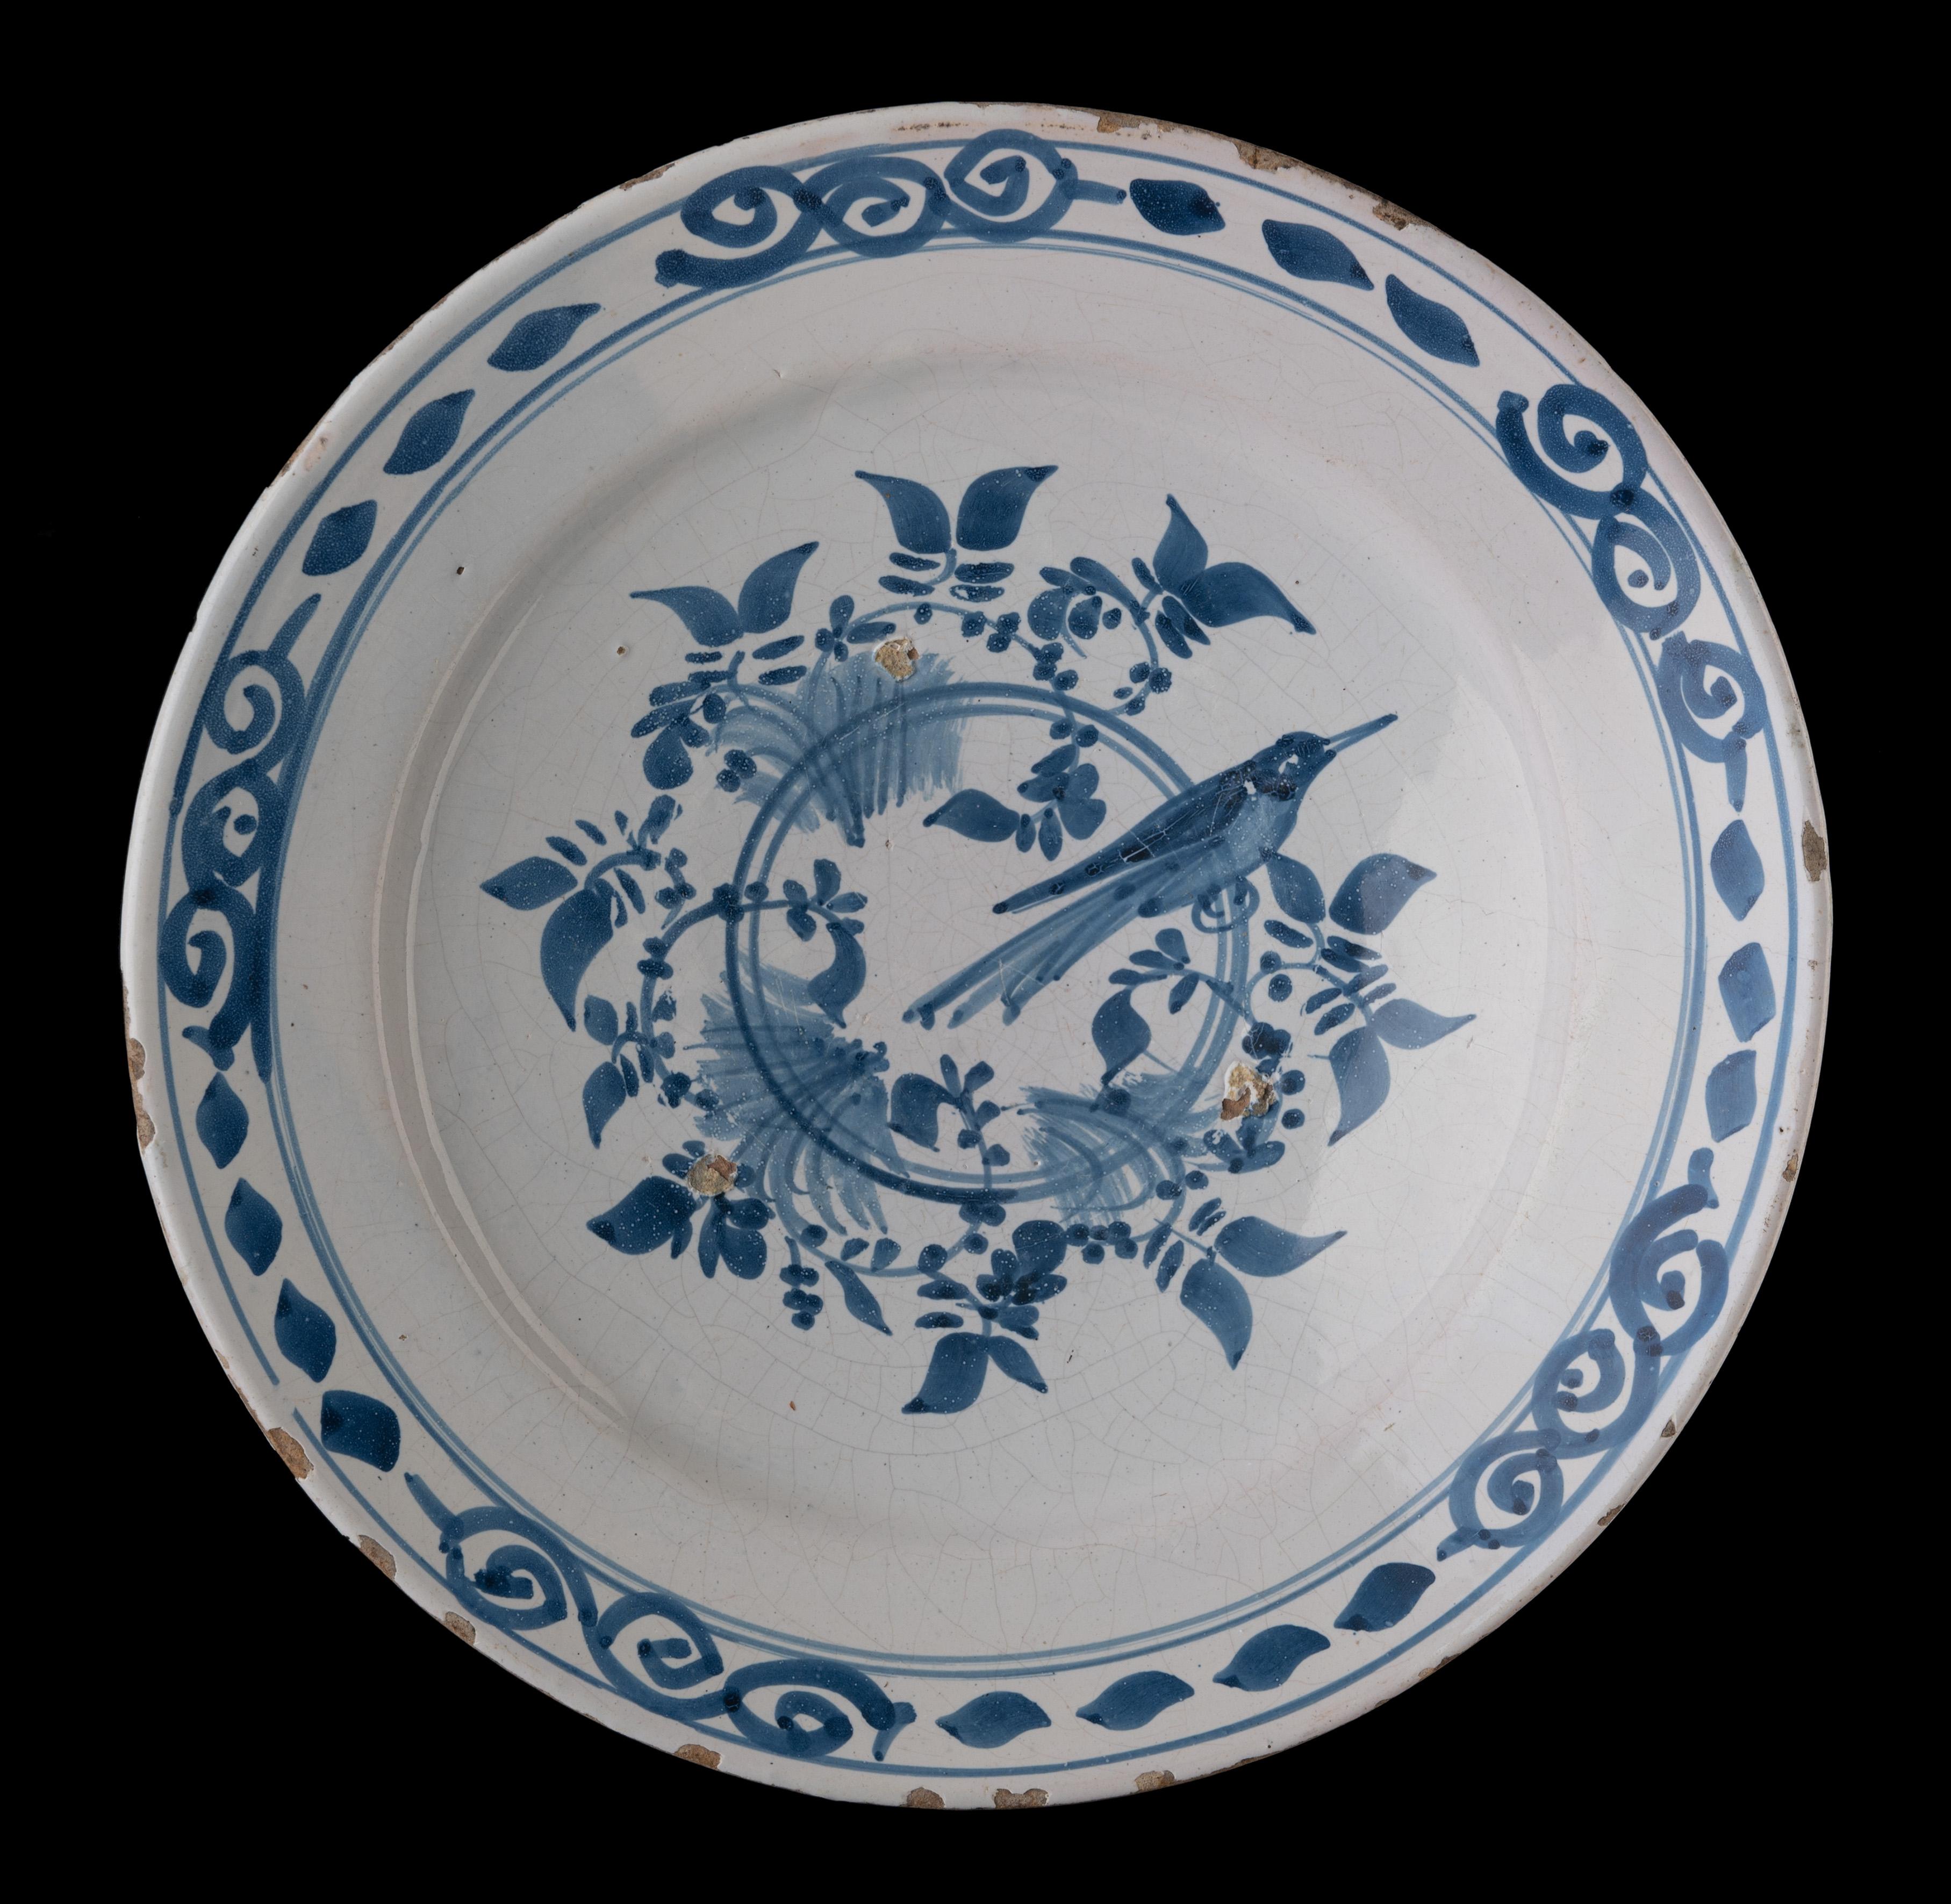 Blue and white dish with bird on a double ring
Delft or Western-Netherlands, 1700-1750 

Blue and white dish with a wide-spreading flange, painted in the centre with a bird on a double ring with leafy garlands. The decor on the flange is made up